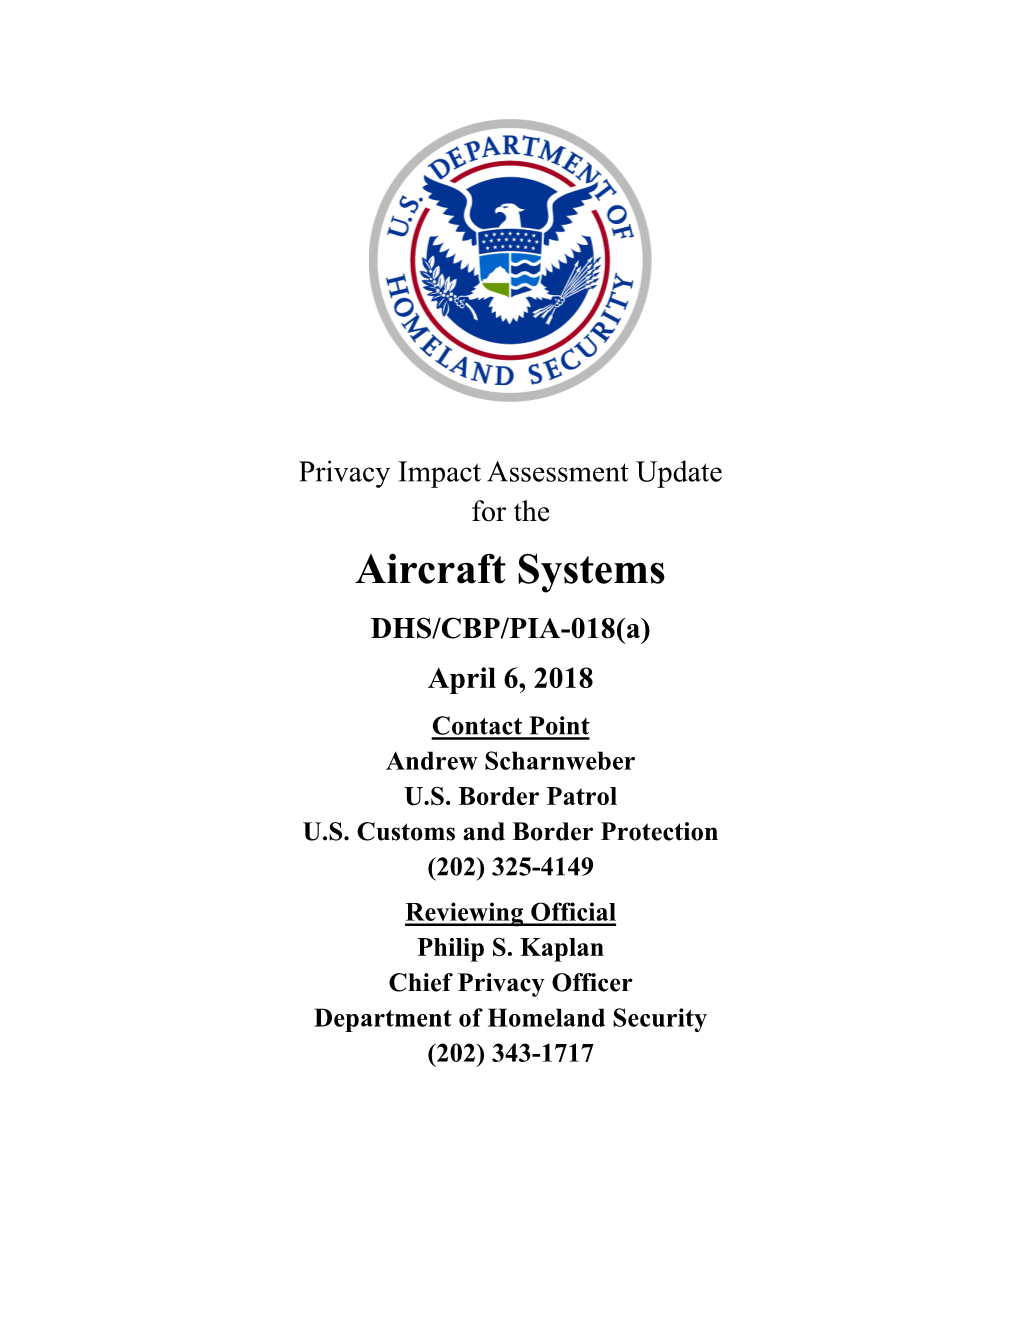 Aircraft Systems DHS/CBP/PIA-018(A) April 6, 2018 Contact Point Andrew Scharnweber U.S